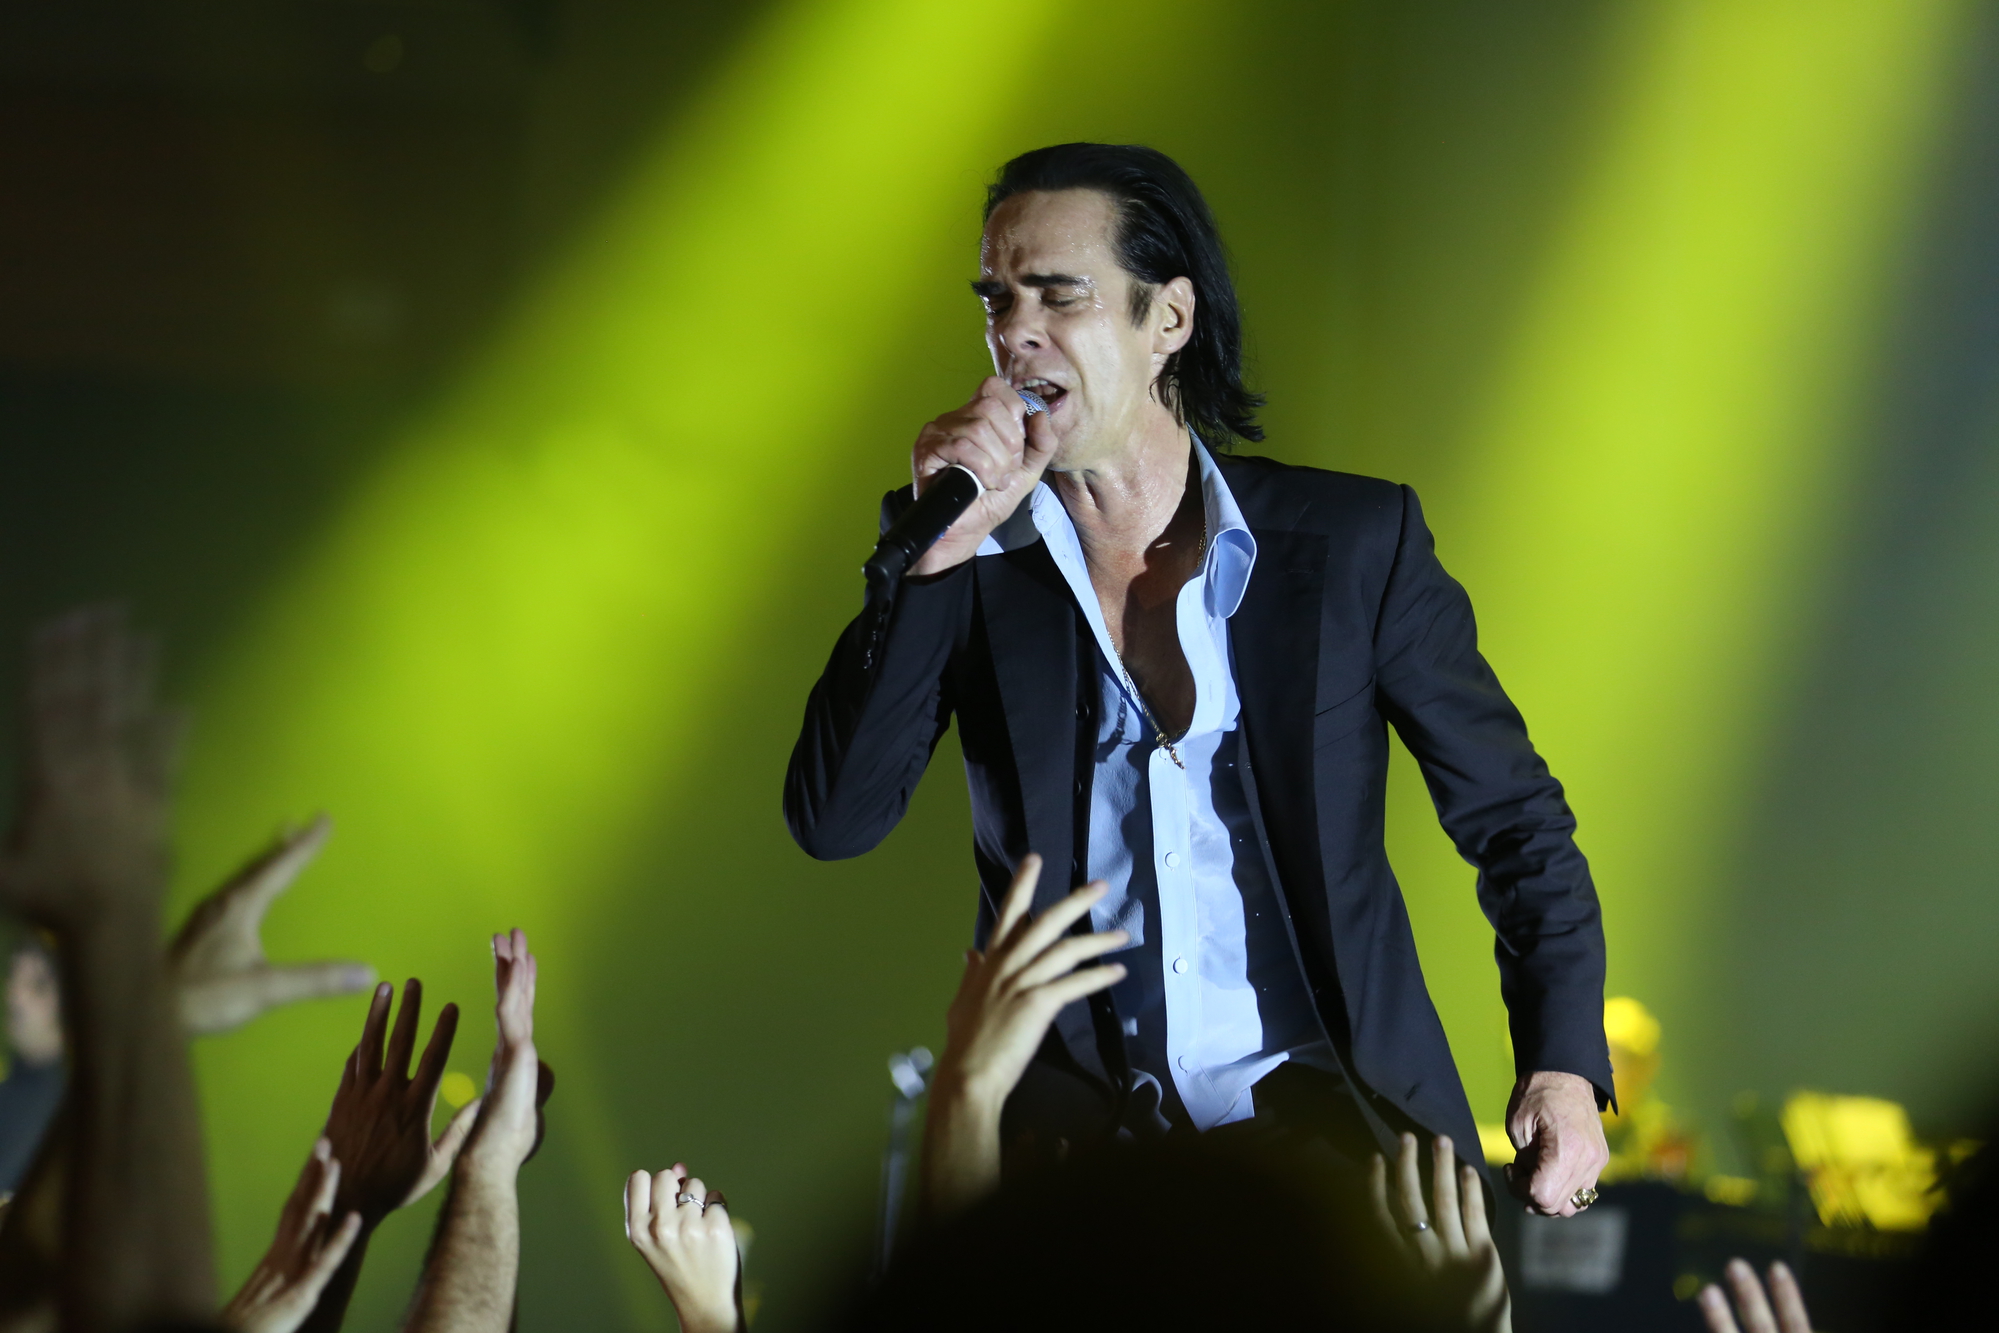 nick-cave-on-struggles-and-guilt-over-sons’-tragic-deaths